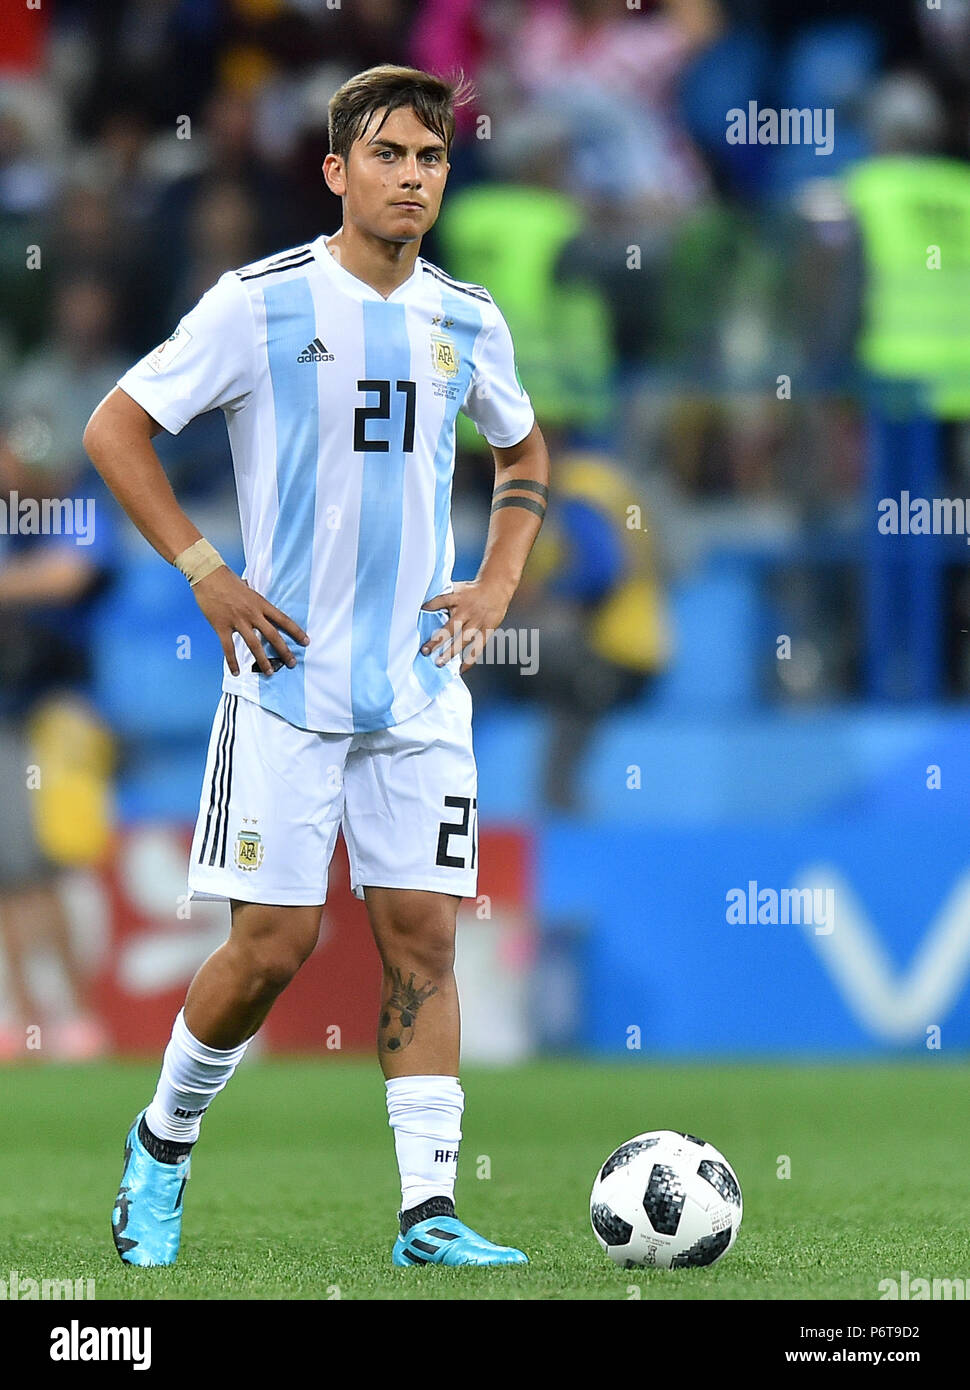 NIZHNIY NOVGOROD, RUSSIA - JUNE 21: Paulo Dybala of Argentina looks on during the 2018 FIFA World Cup Russia group D match between Argentina and Croatia at Nizhniy Novgorod Stadium on June 21, 2018 in Nizhniy Novgorod, Russia. (Photo by Lukasz Laskowski/PressFocus/MB Media) Stock Photo